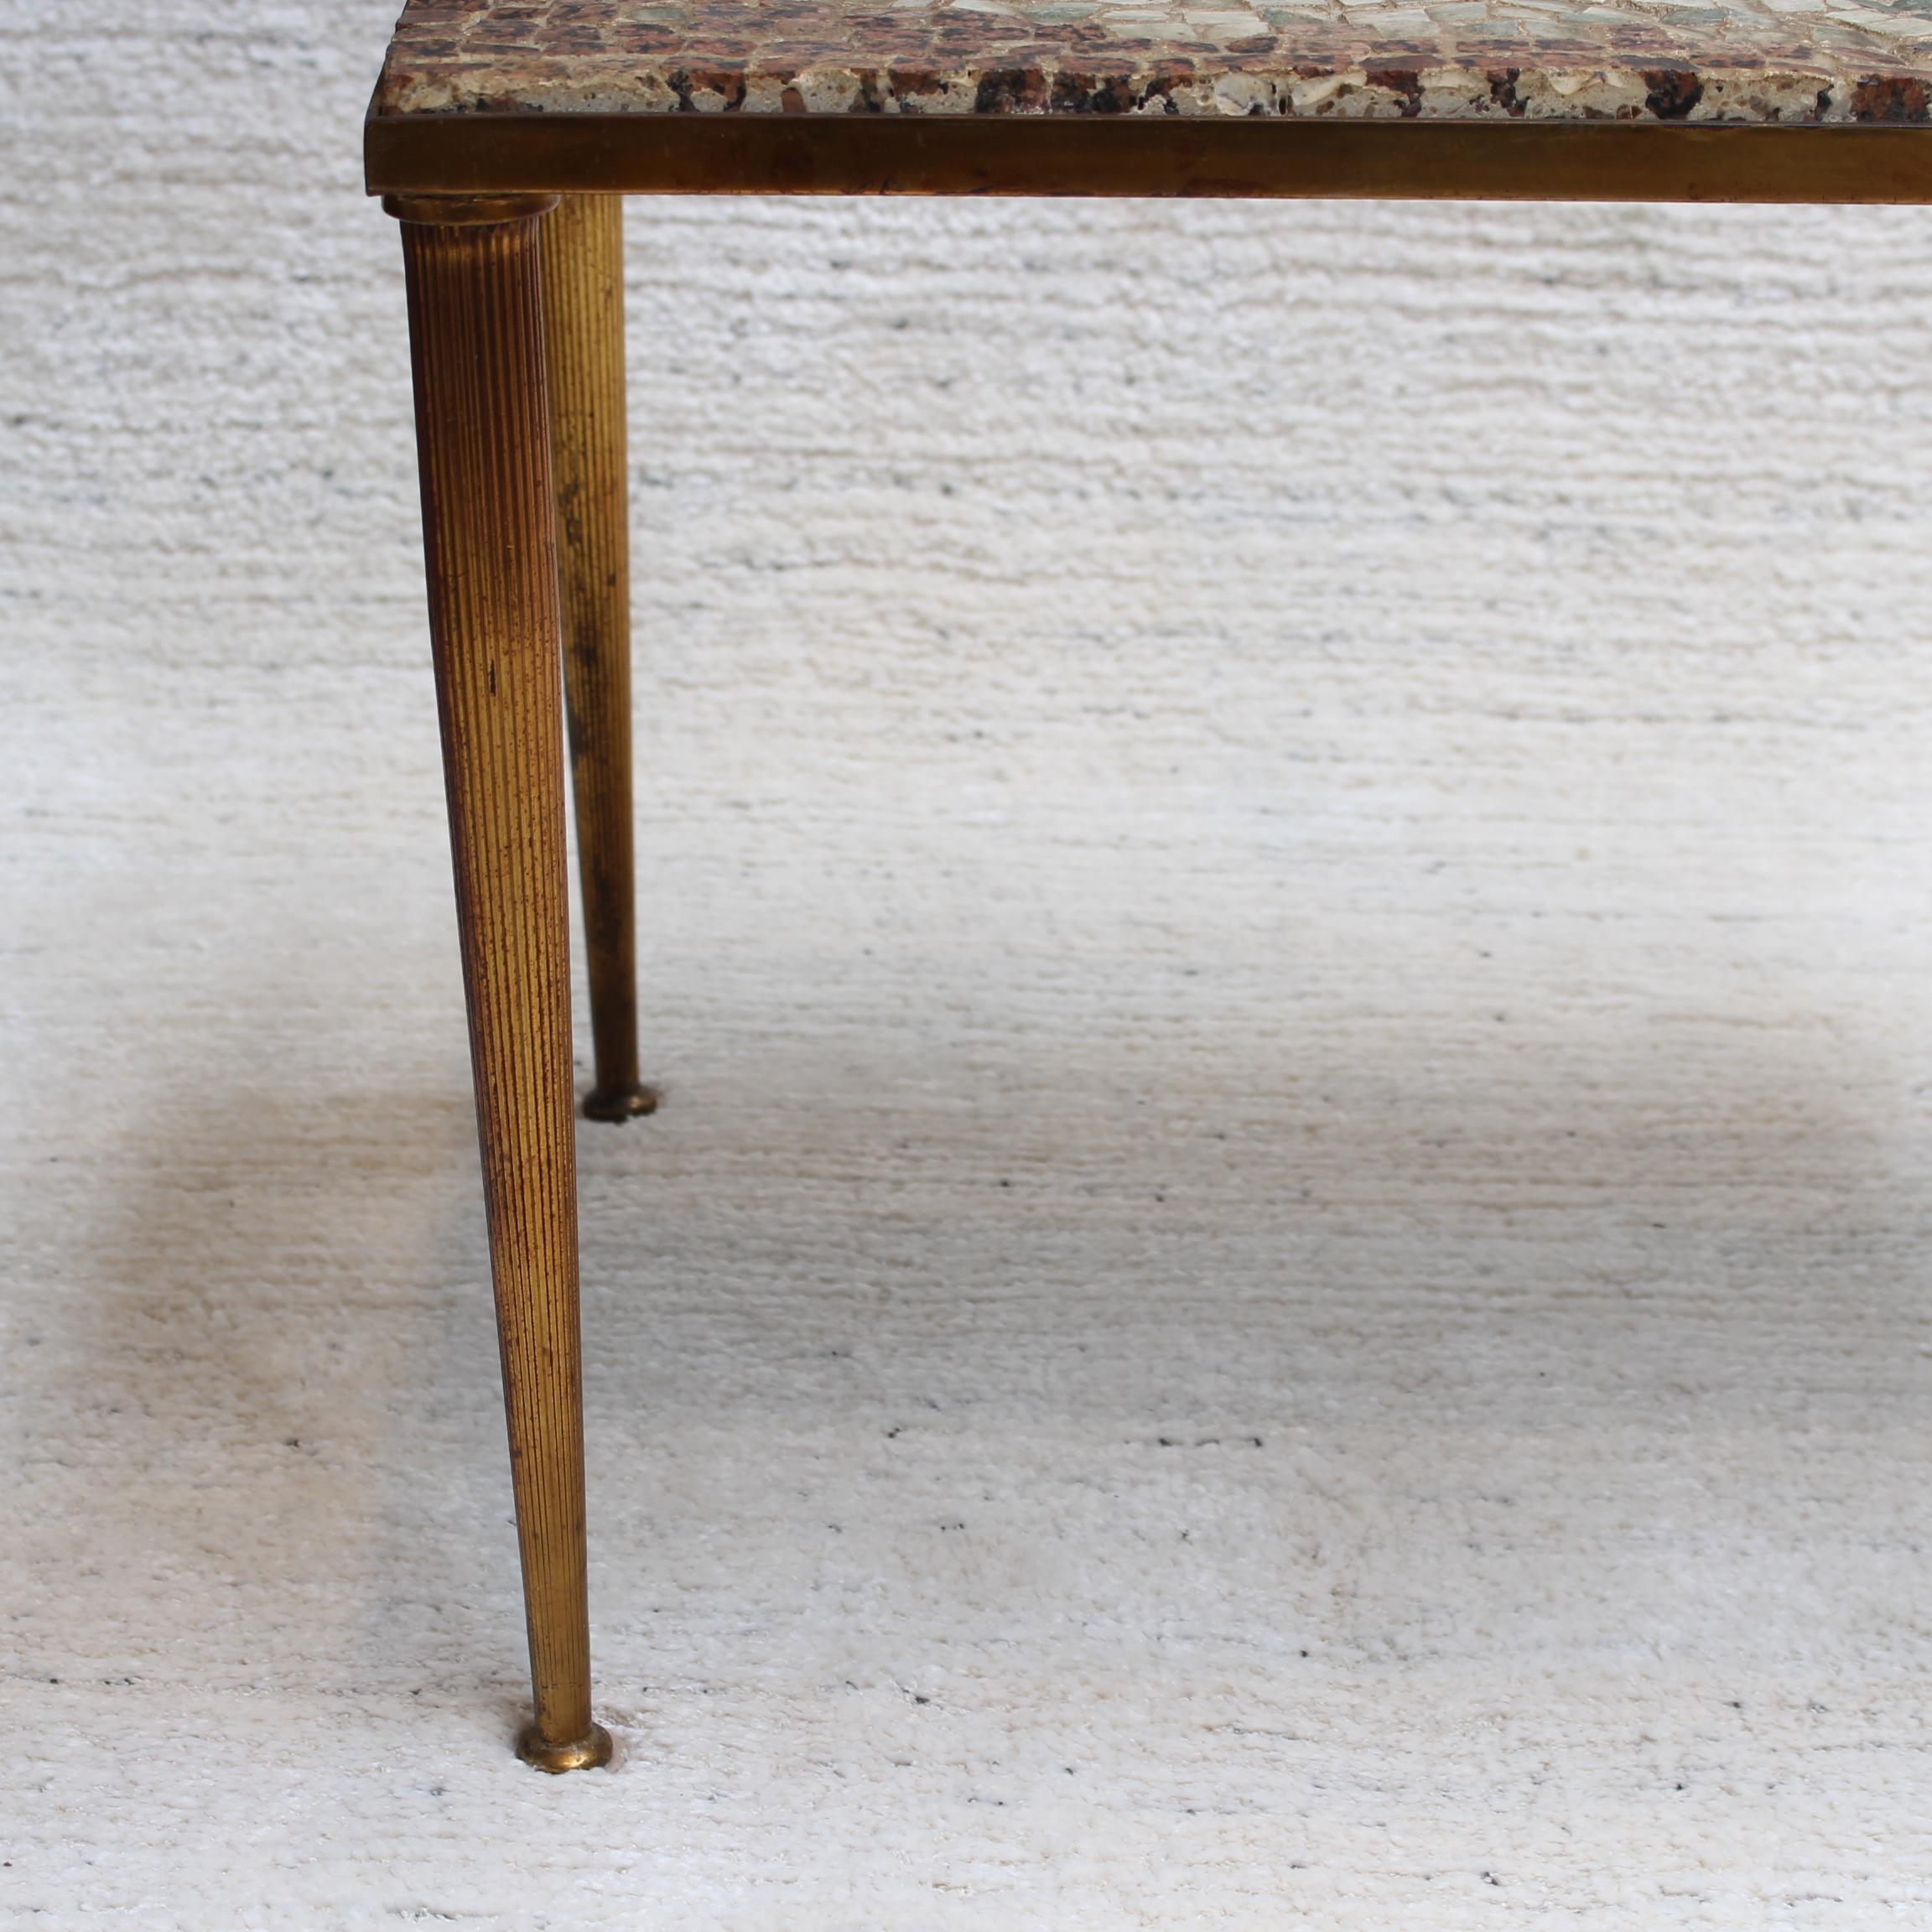 Vintage Low Table with Italian Style Mosaic Top, 'circa 1950s' For Sale 1